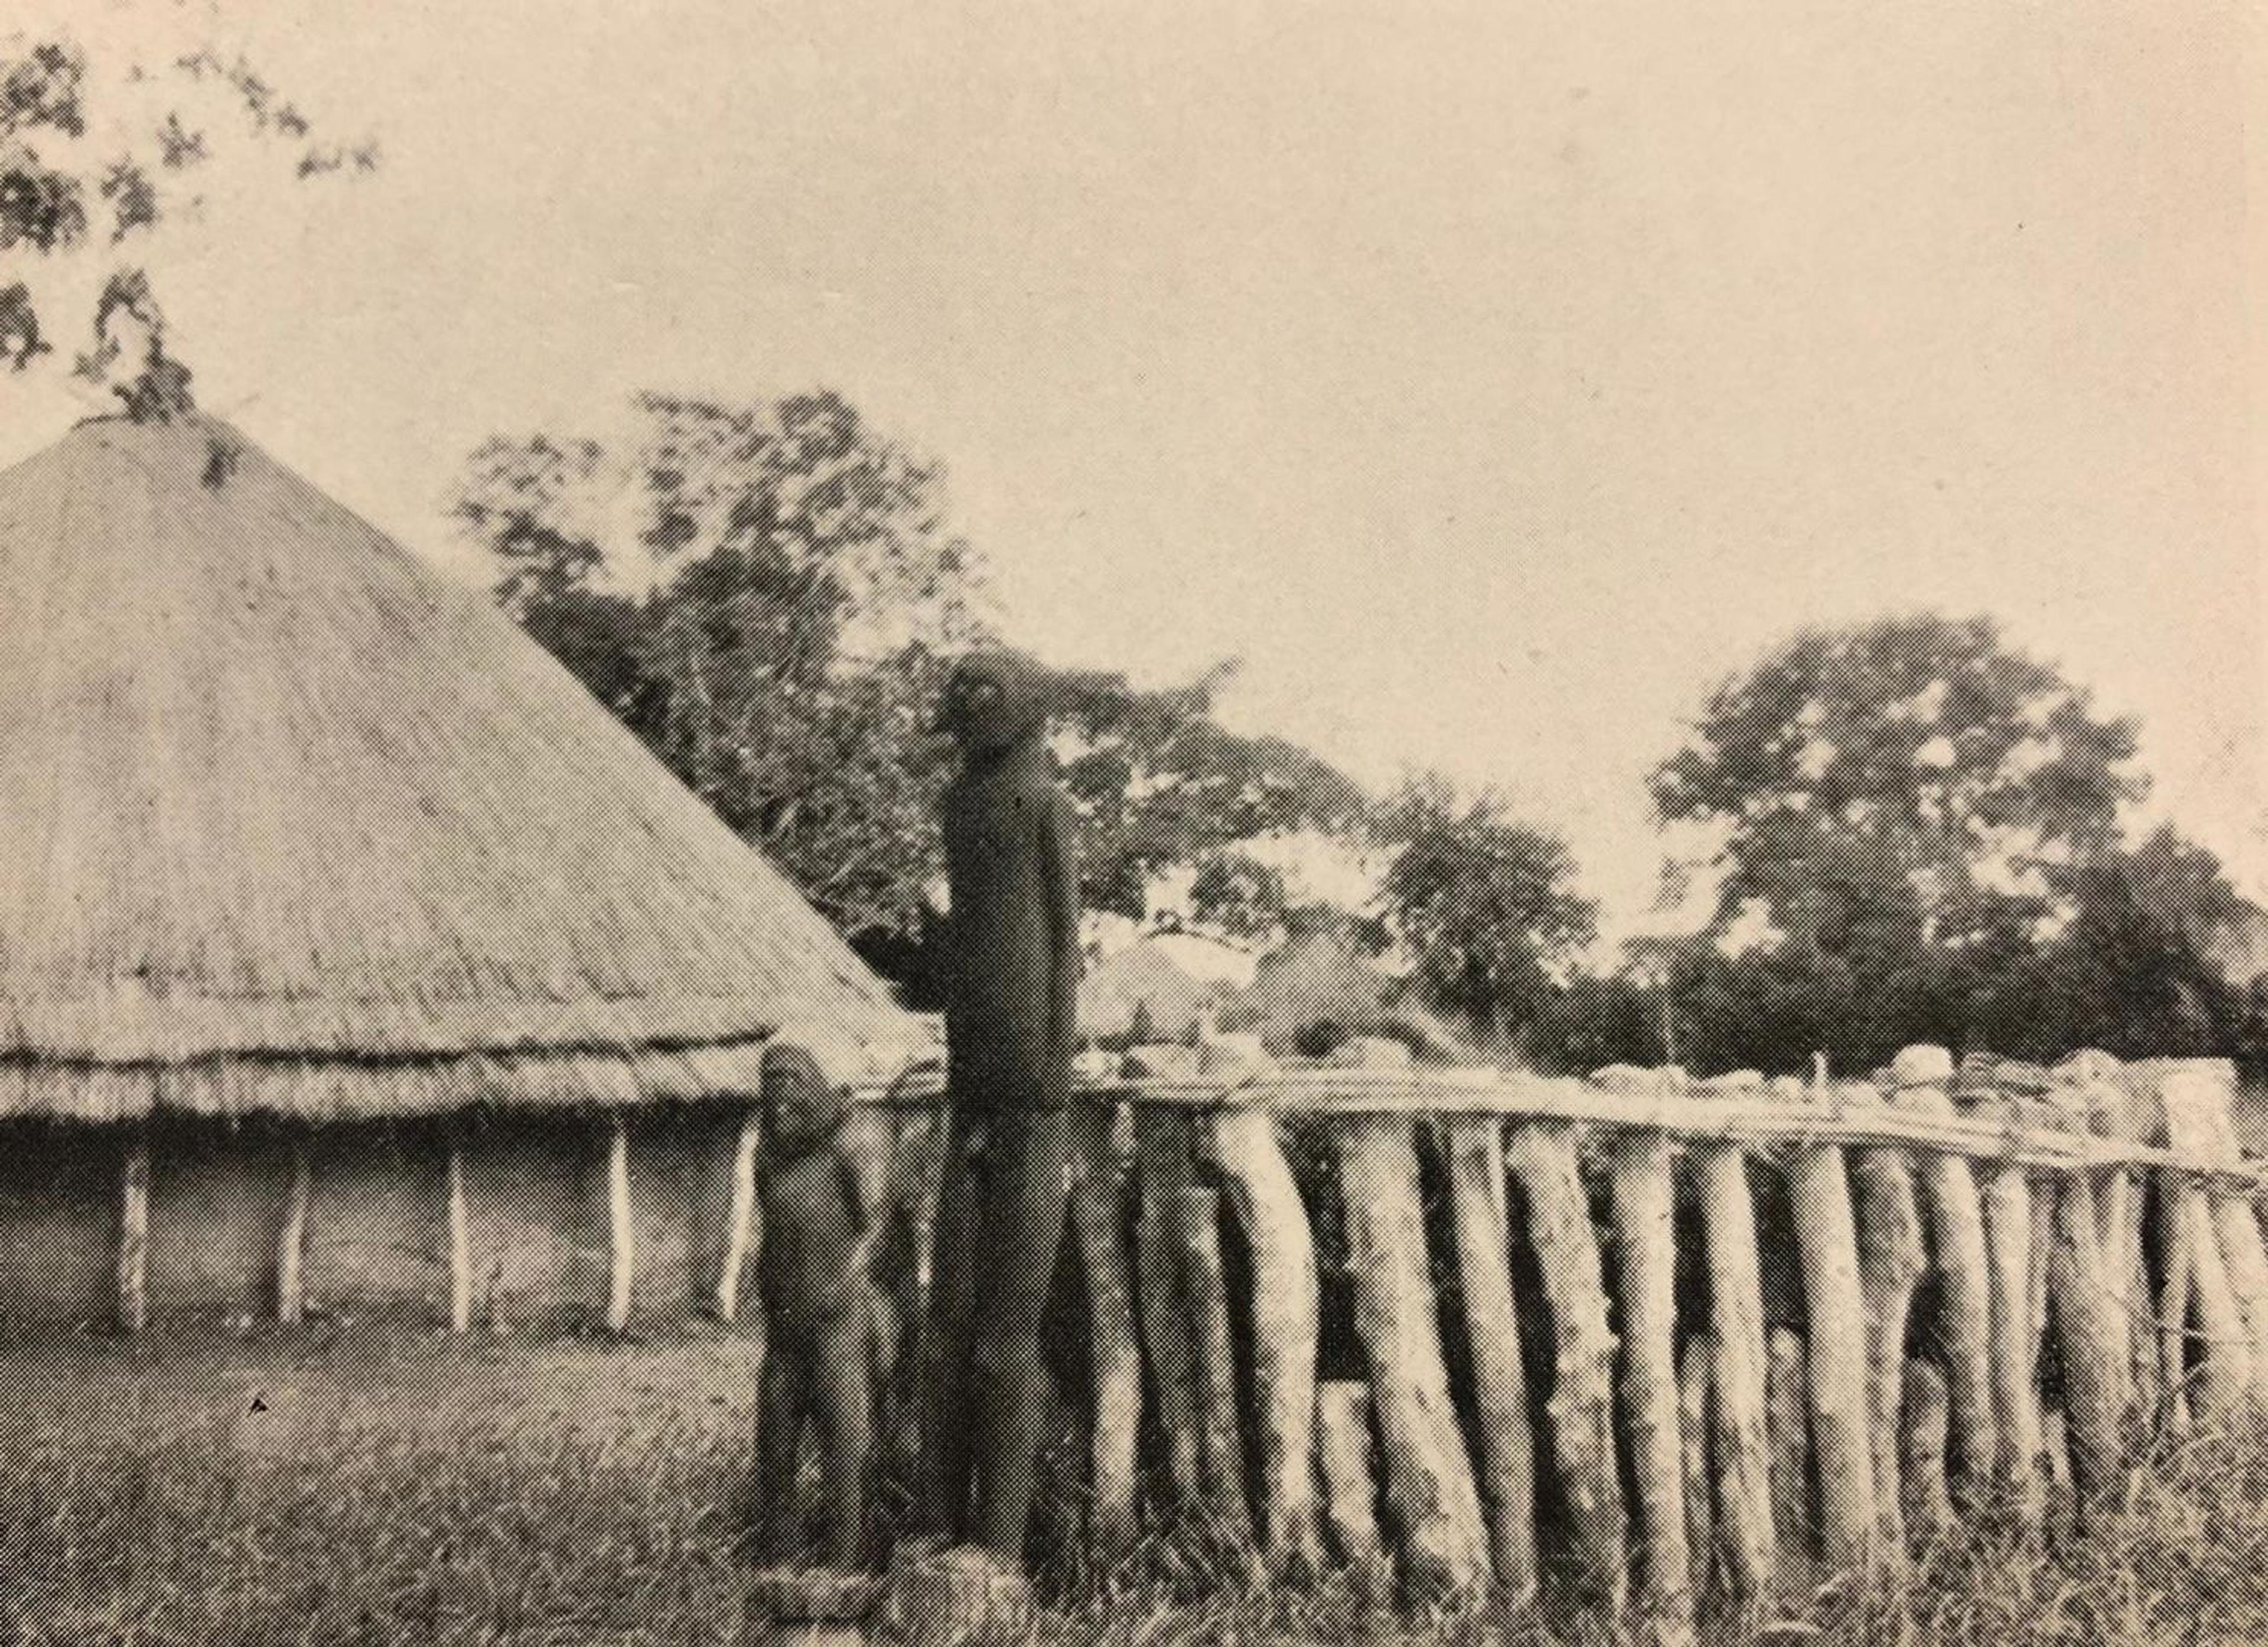 Early 20th-century photo of a Bongo or Mittu funerary monument